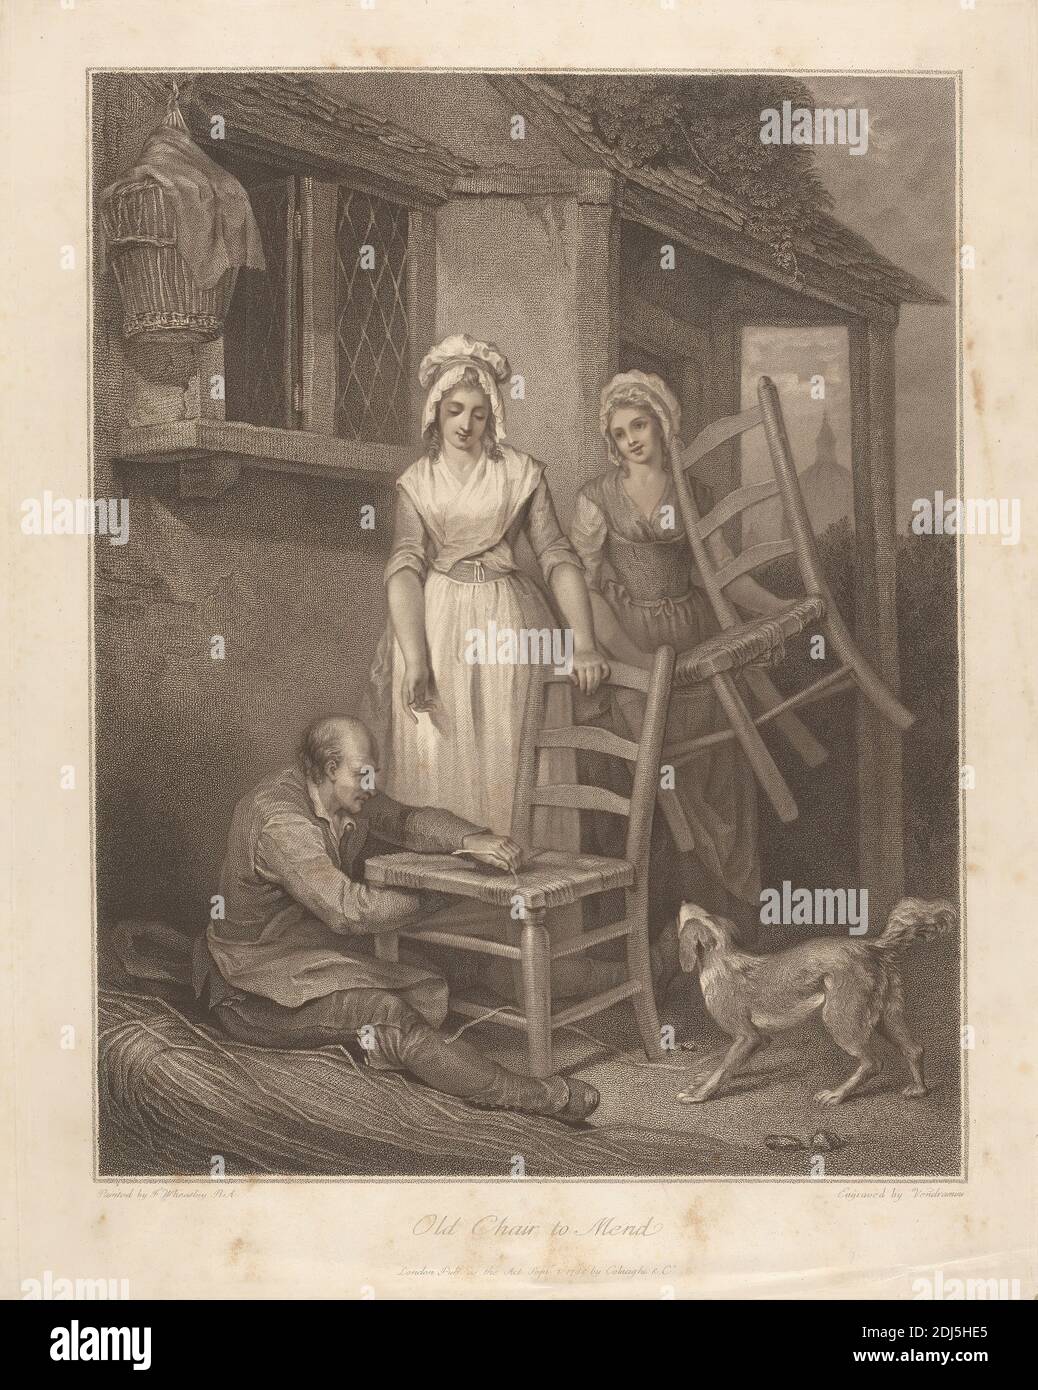 Old Chair to Mend, Giovanni Vendramini, 1769–1839, Italian, after Francis Wheatley, 1747–1801, British, 1795, Aquatint, Sheet: 17 1/4 x 13 3/4 inches (43.8 x 34.9 cm), Plate: 16 1/2 x 12 7/8 inches (41.9 x 32.7 cm), and Image: 14 1/4 x 11 1/8 inches (36.2 x 28.3 cm Stock Photo